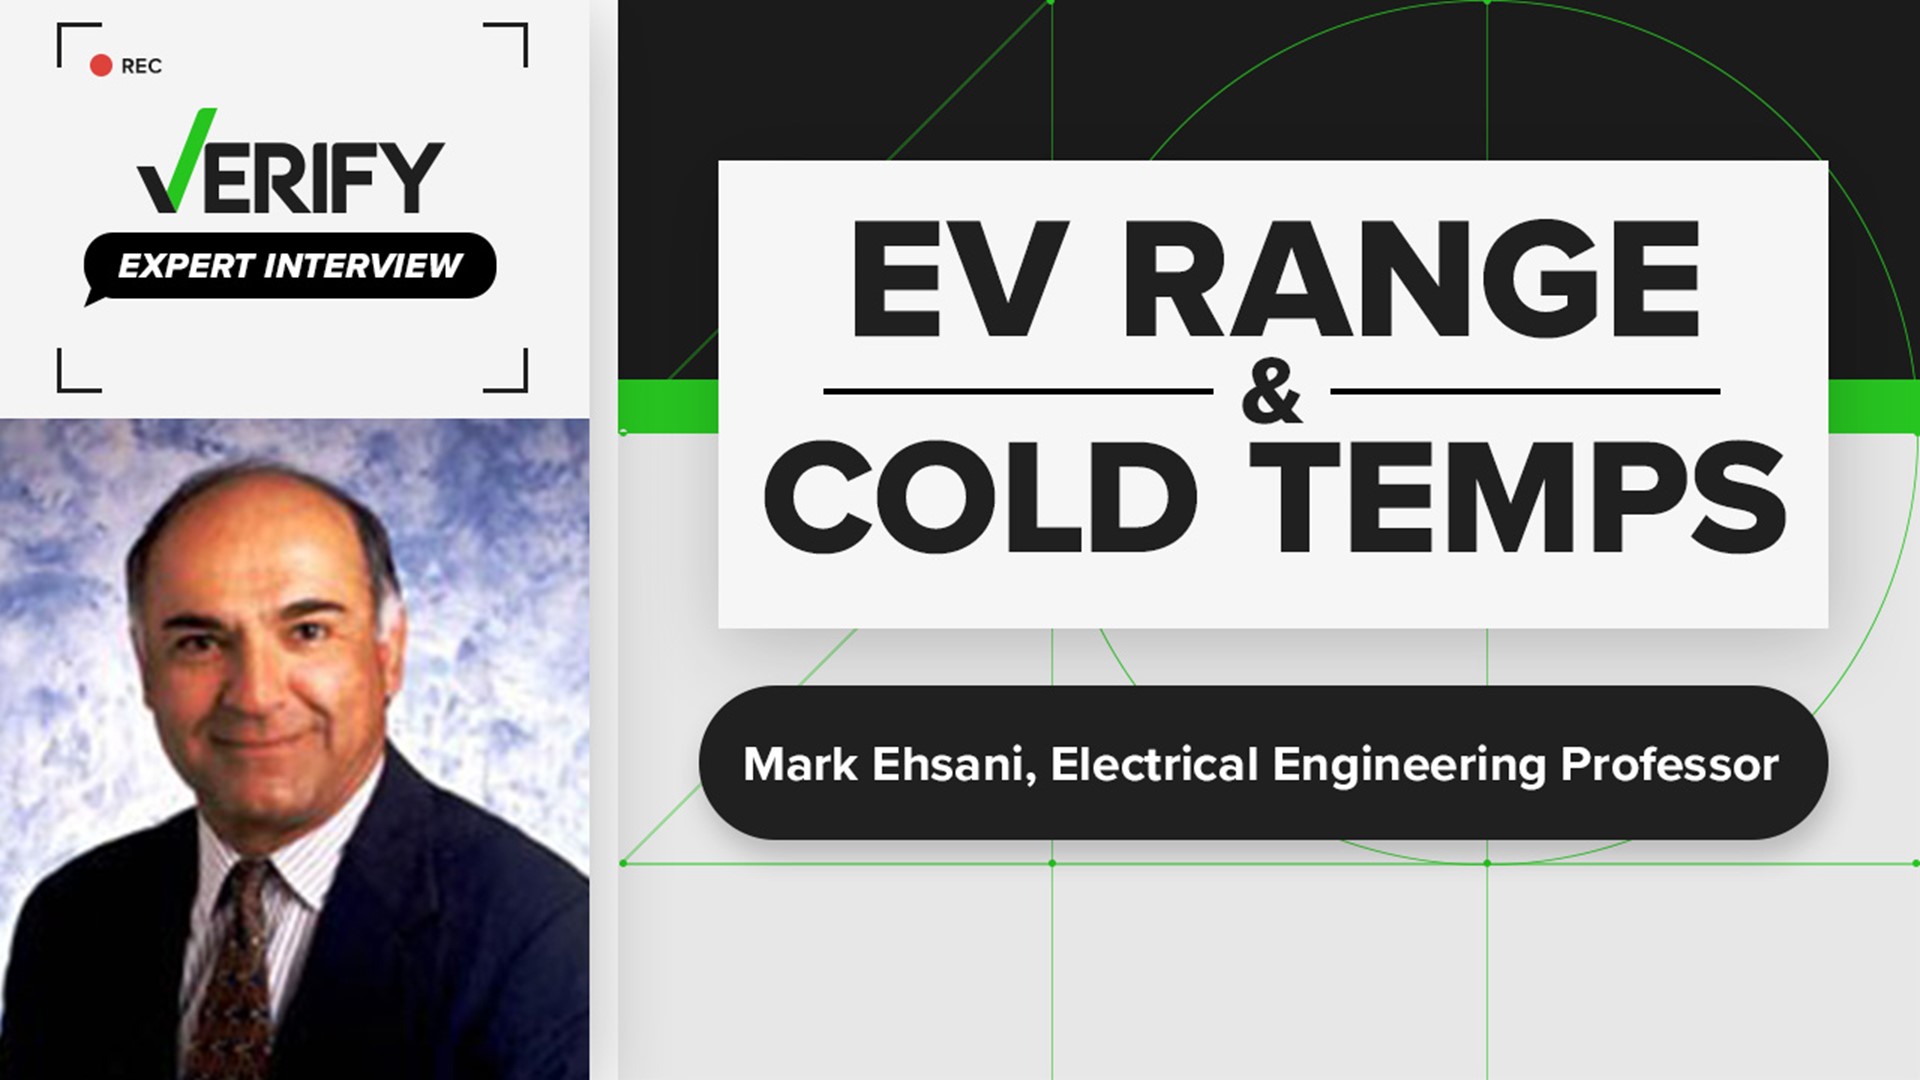 Did you know cold weather can affect the range of an electric vehicle? Electrical Engineering professor Mark Ehsani spoke with VERIFY about this interesting question